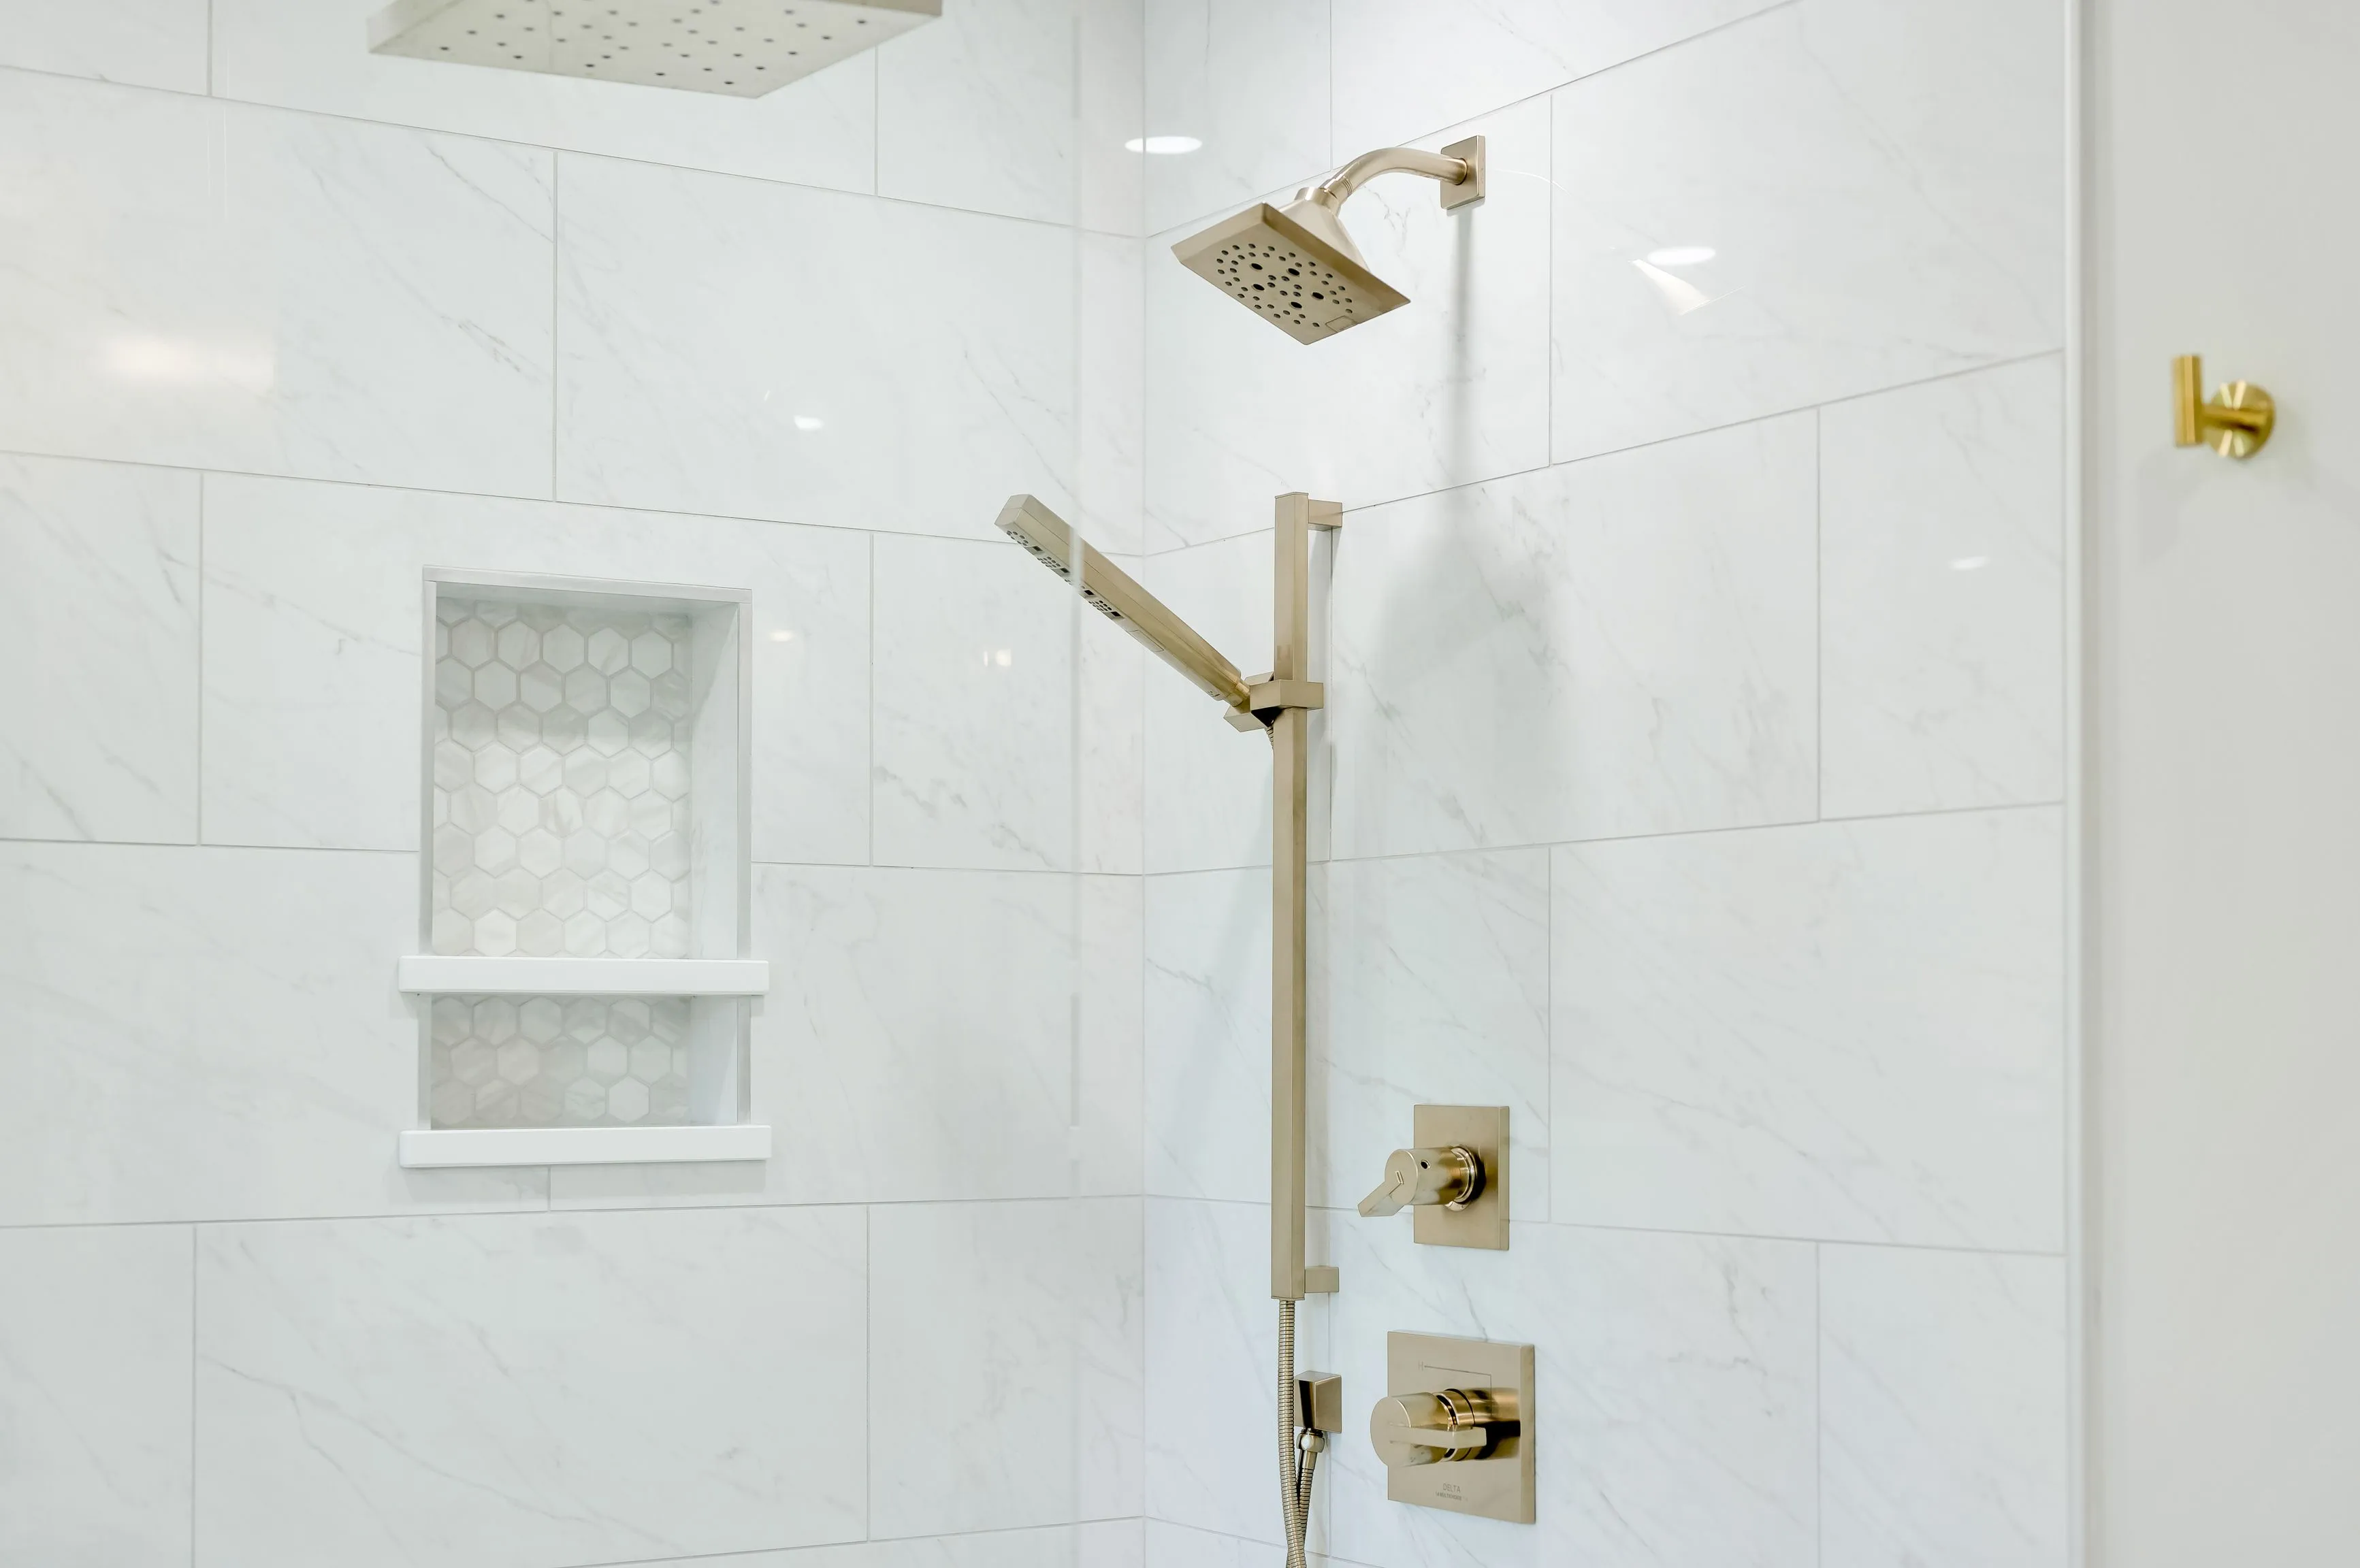 Modern shower with marble tiles, gold fixtures, built-in shelf, and dual shower heads.